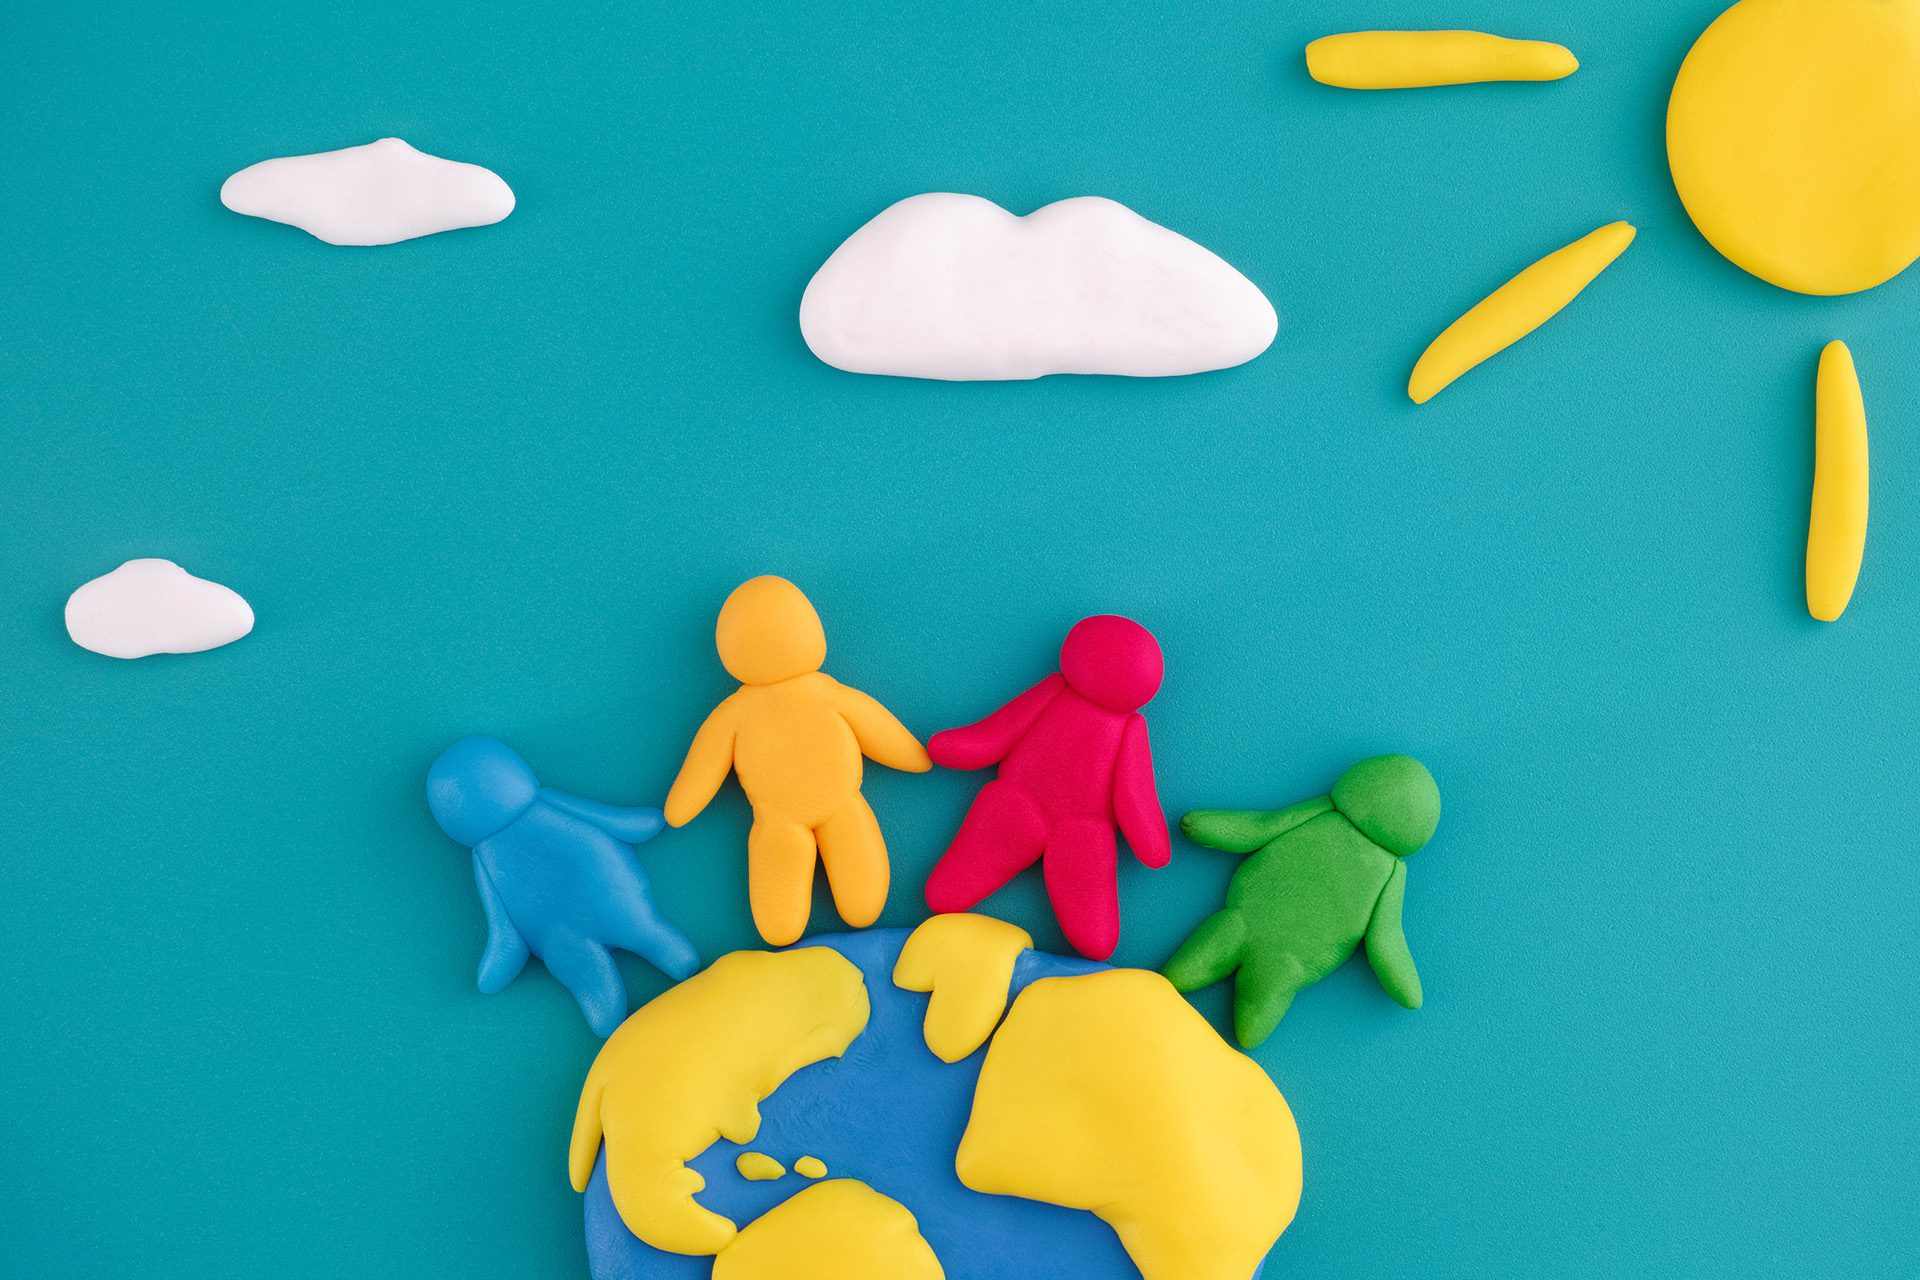 group of people around the world made of playdough